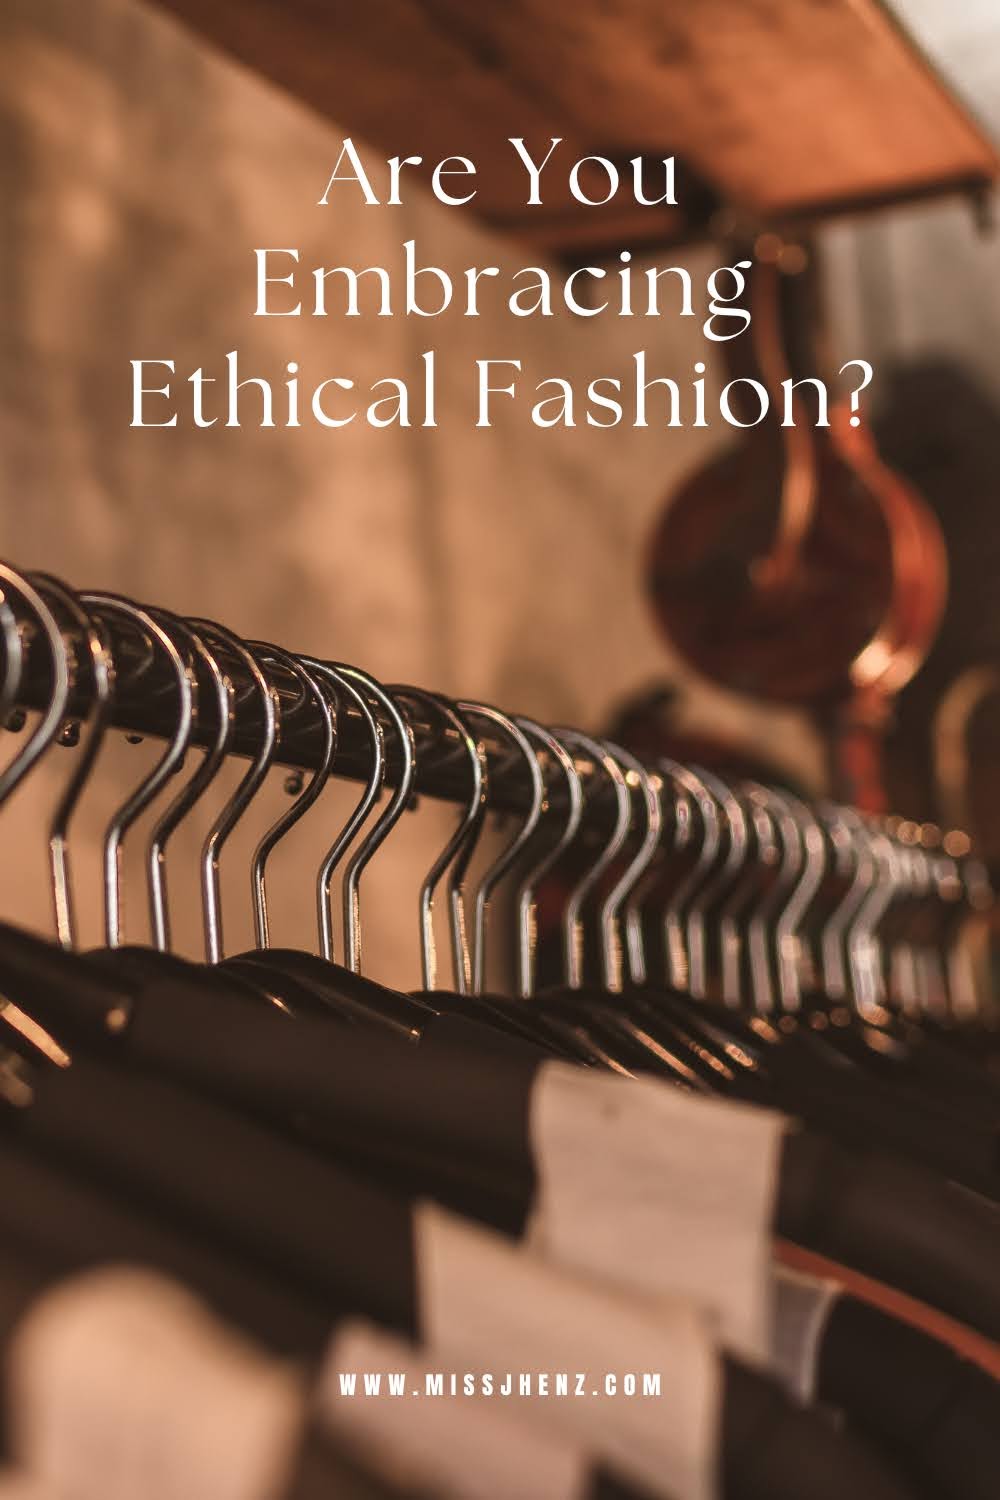 Are You Embracing Ethical Fashion?